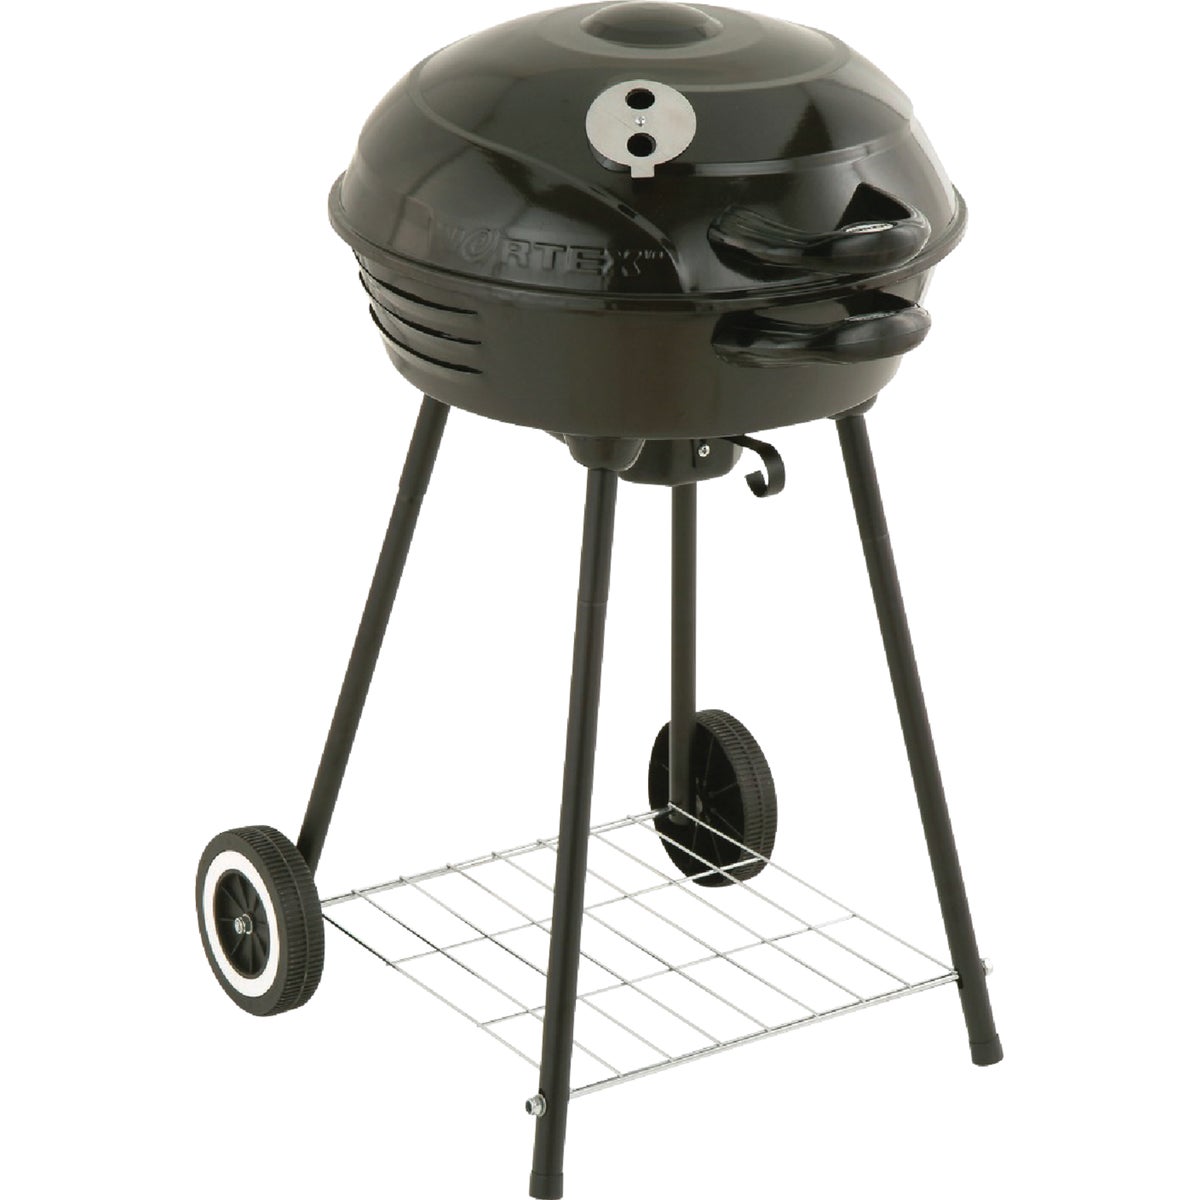 Item 800120, 18 In. round charcoal grill with 227 Sq. In. cooking surface.